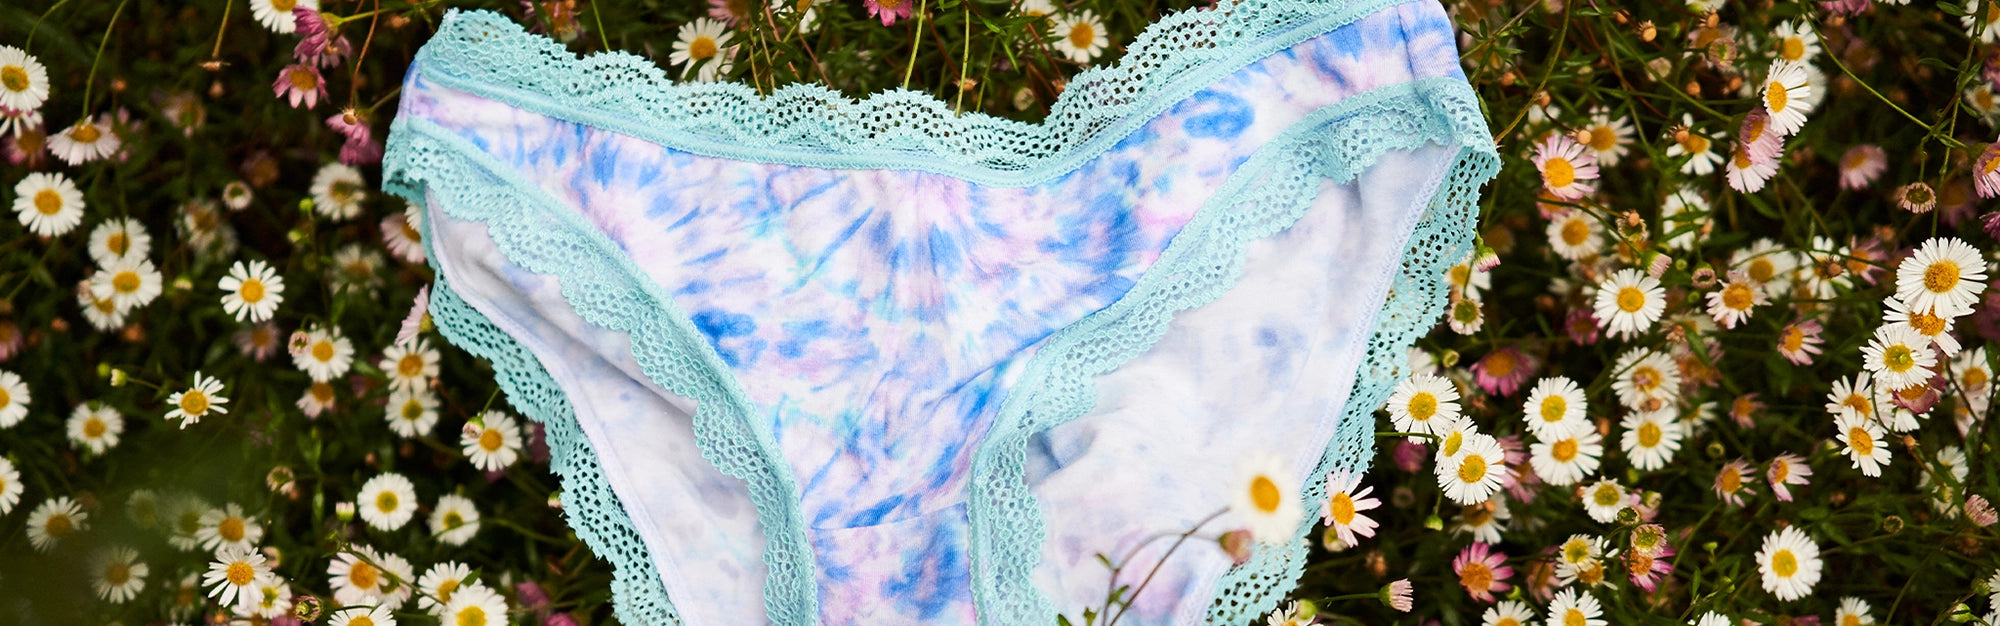 Tie dye print knickers on grass surrounded by daisies